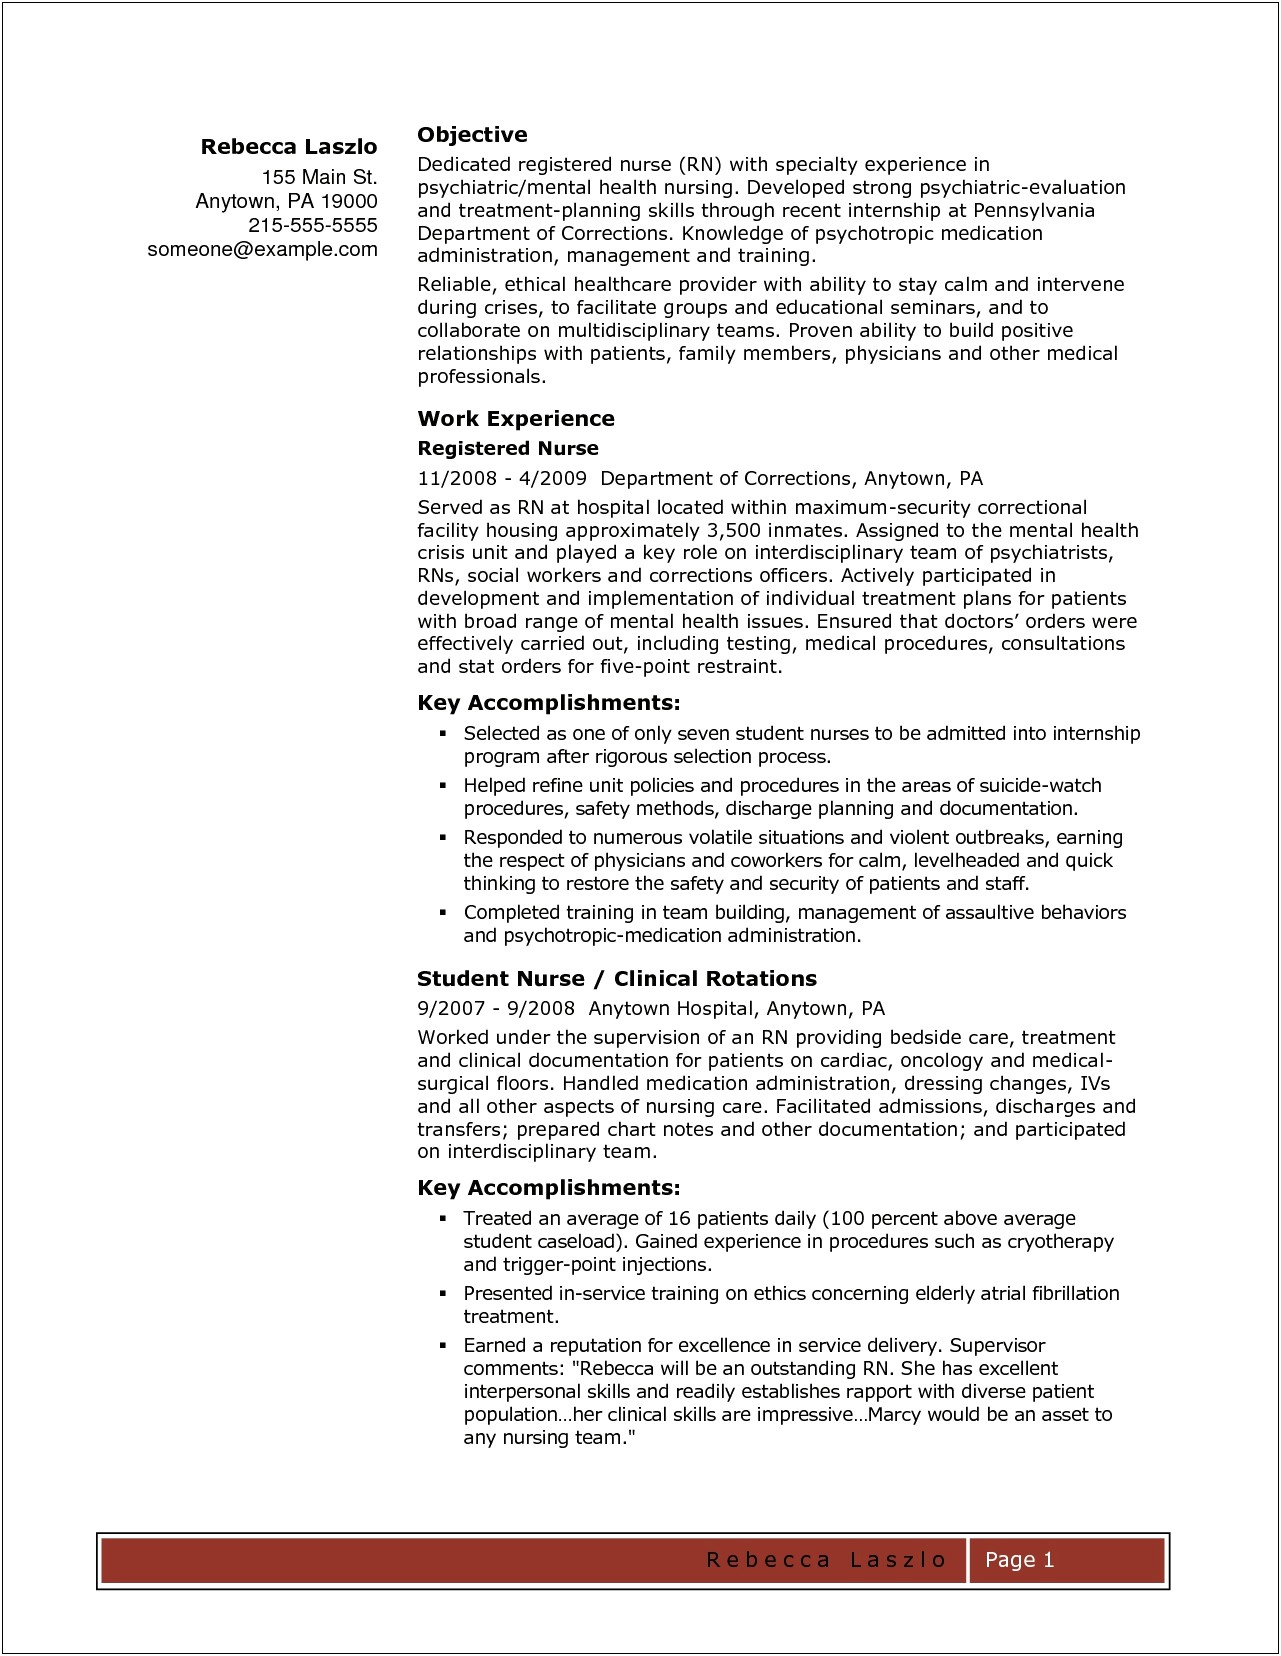 Resume Examples For Nursing Oncology